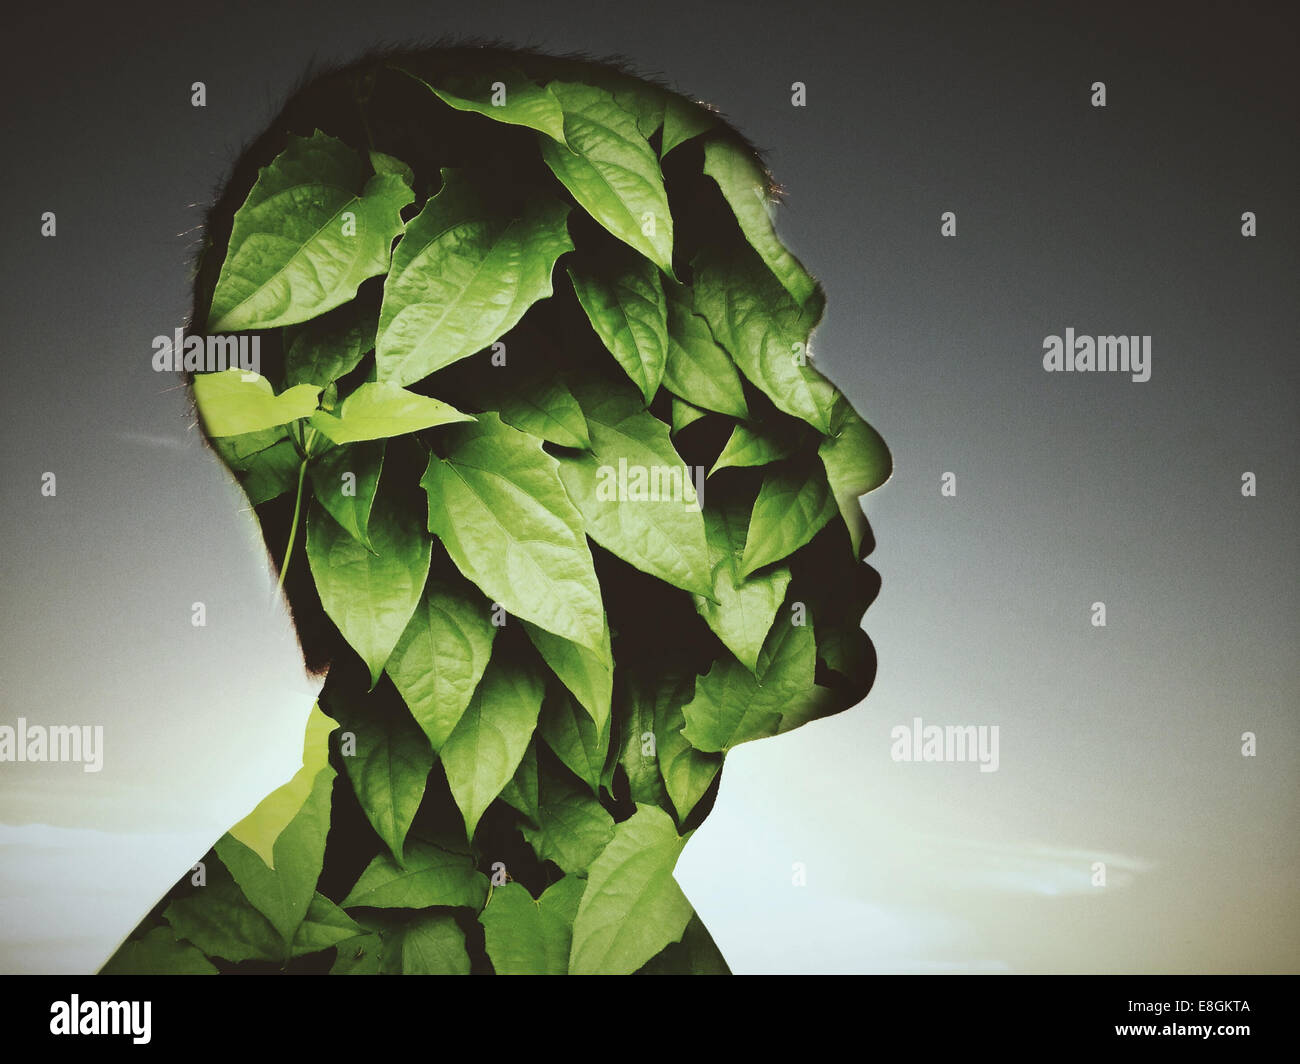 Leaves covering profile of man's face Stock Photo